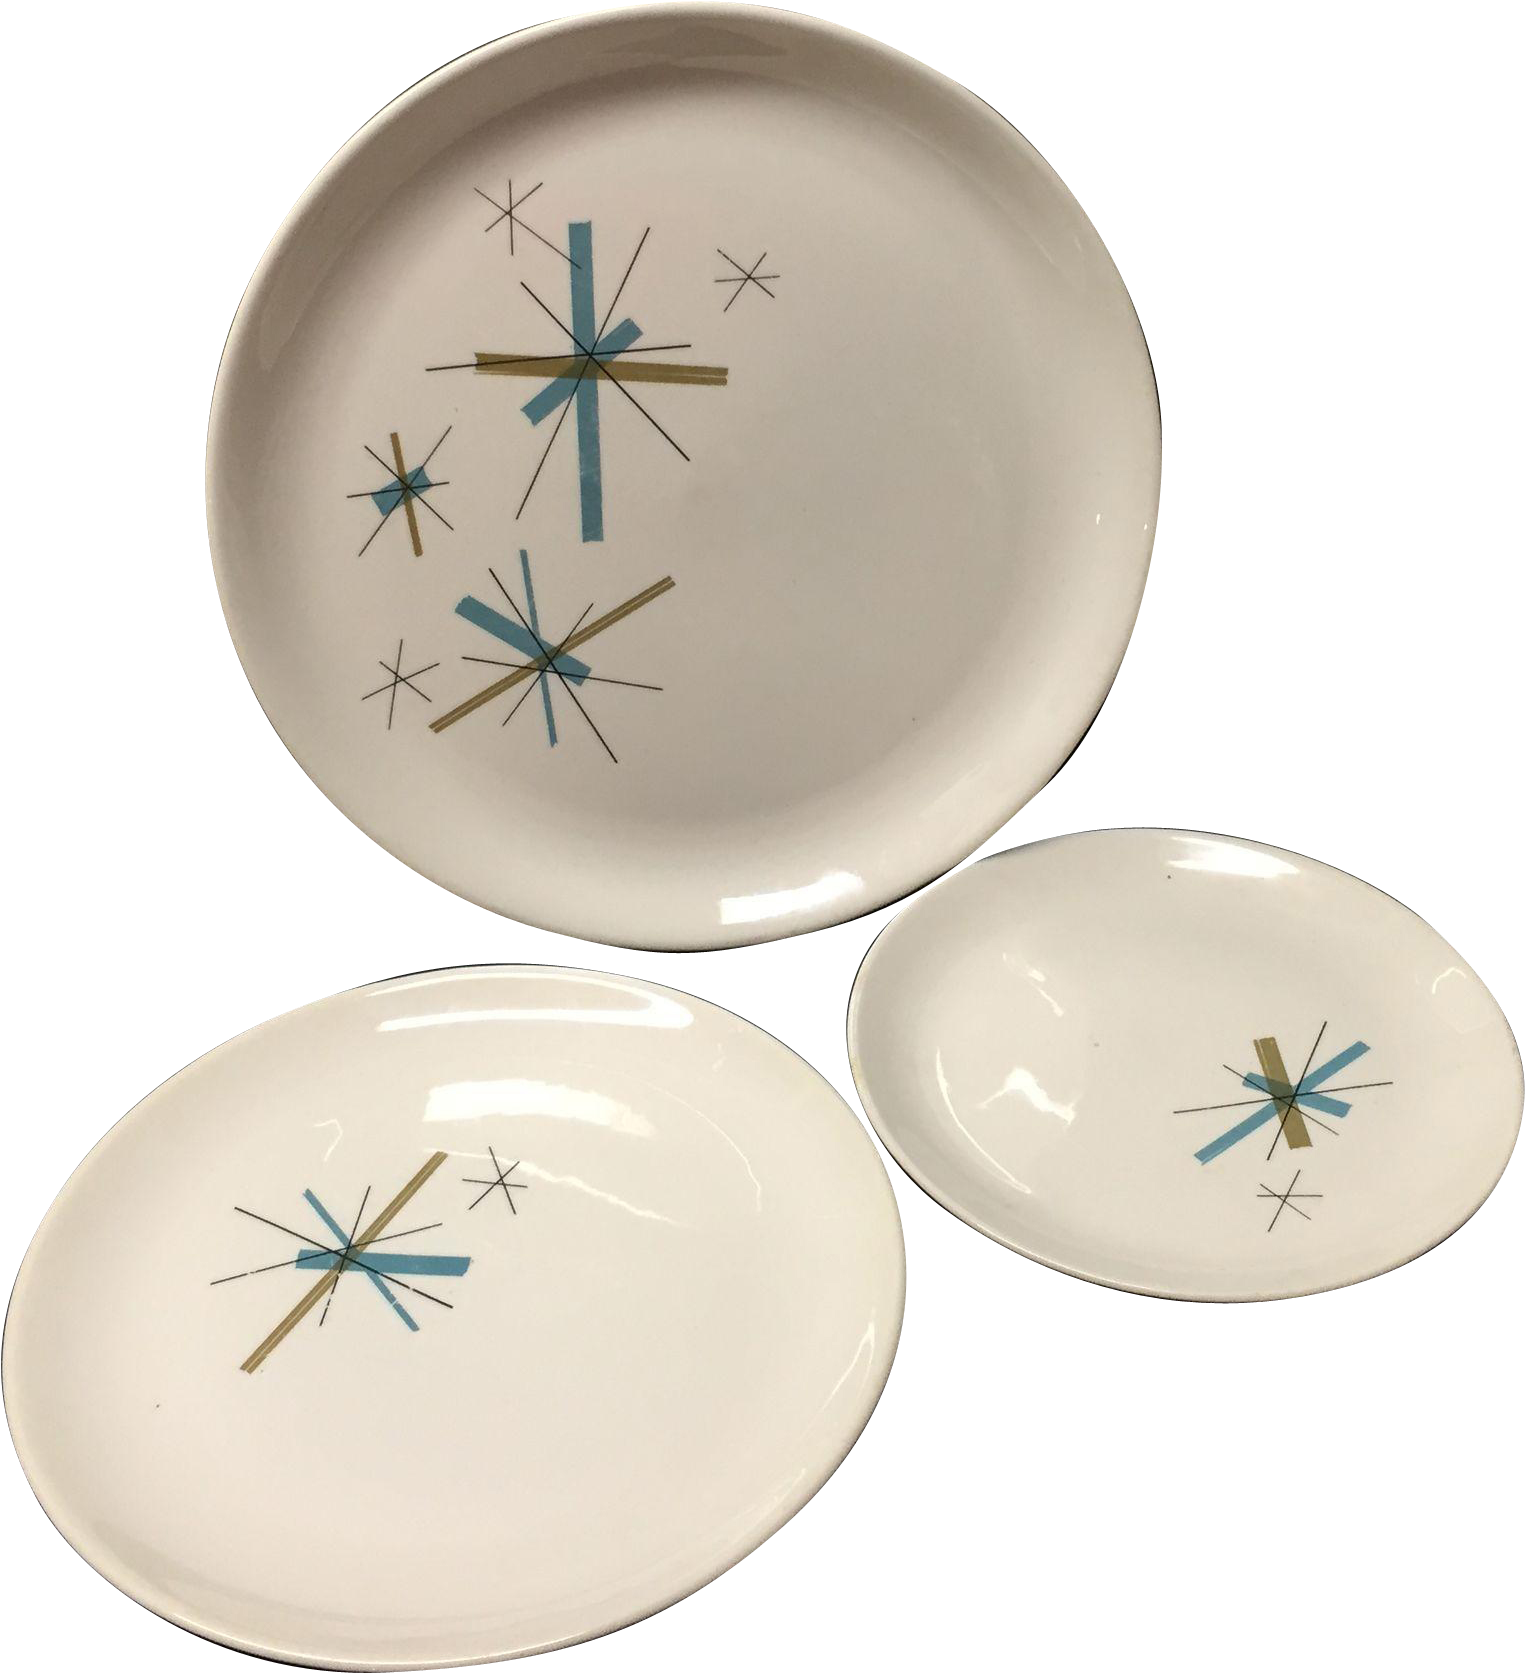 A Group Of Plates With Designs On Them